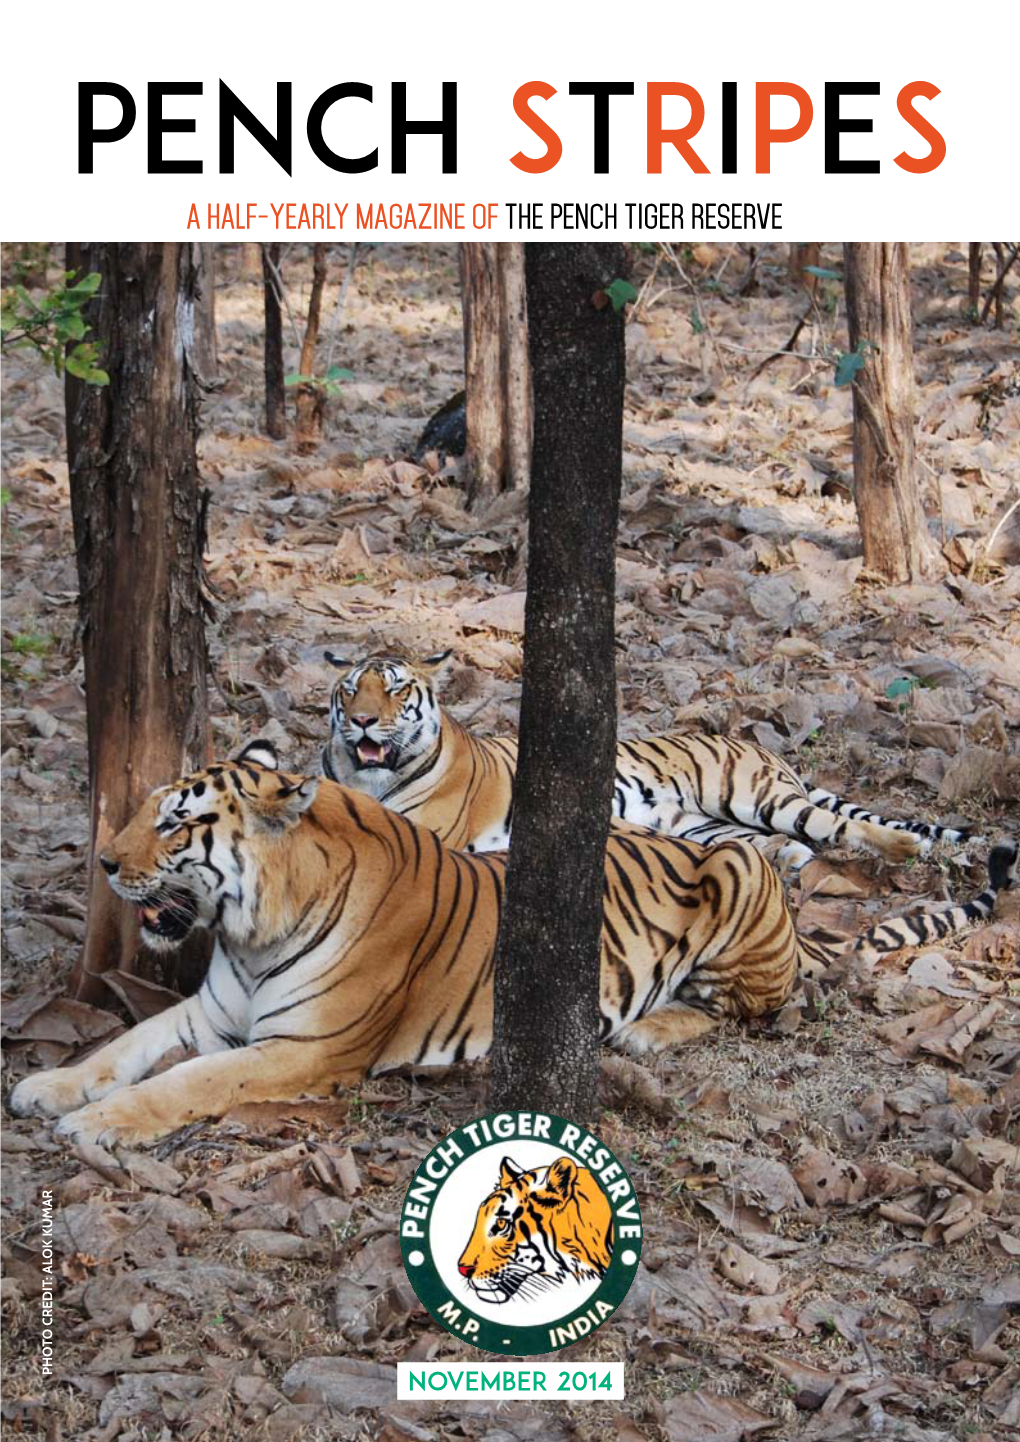 A Half-Yearly Magazine of the Pench Tiger Reserve